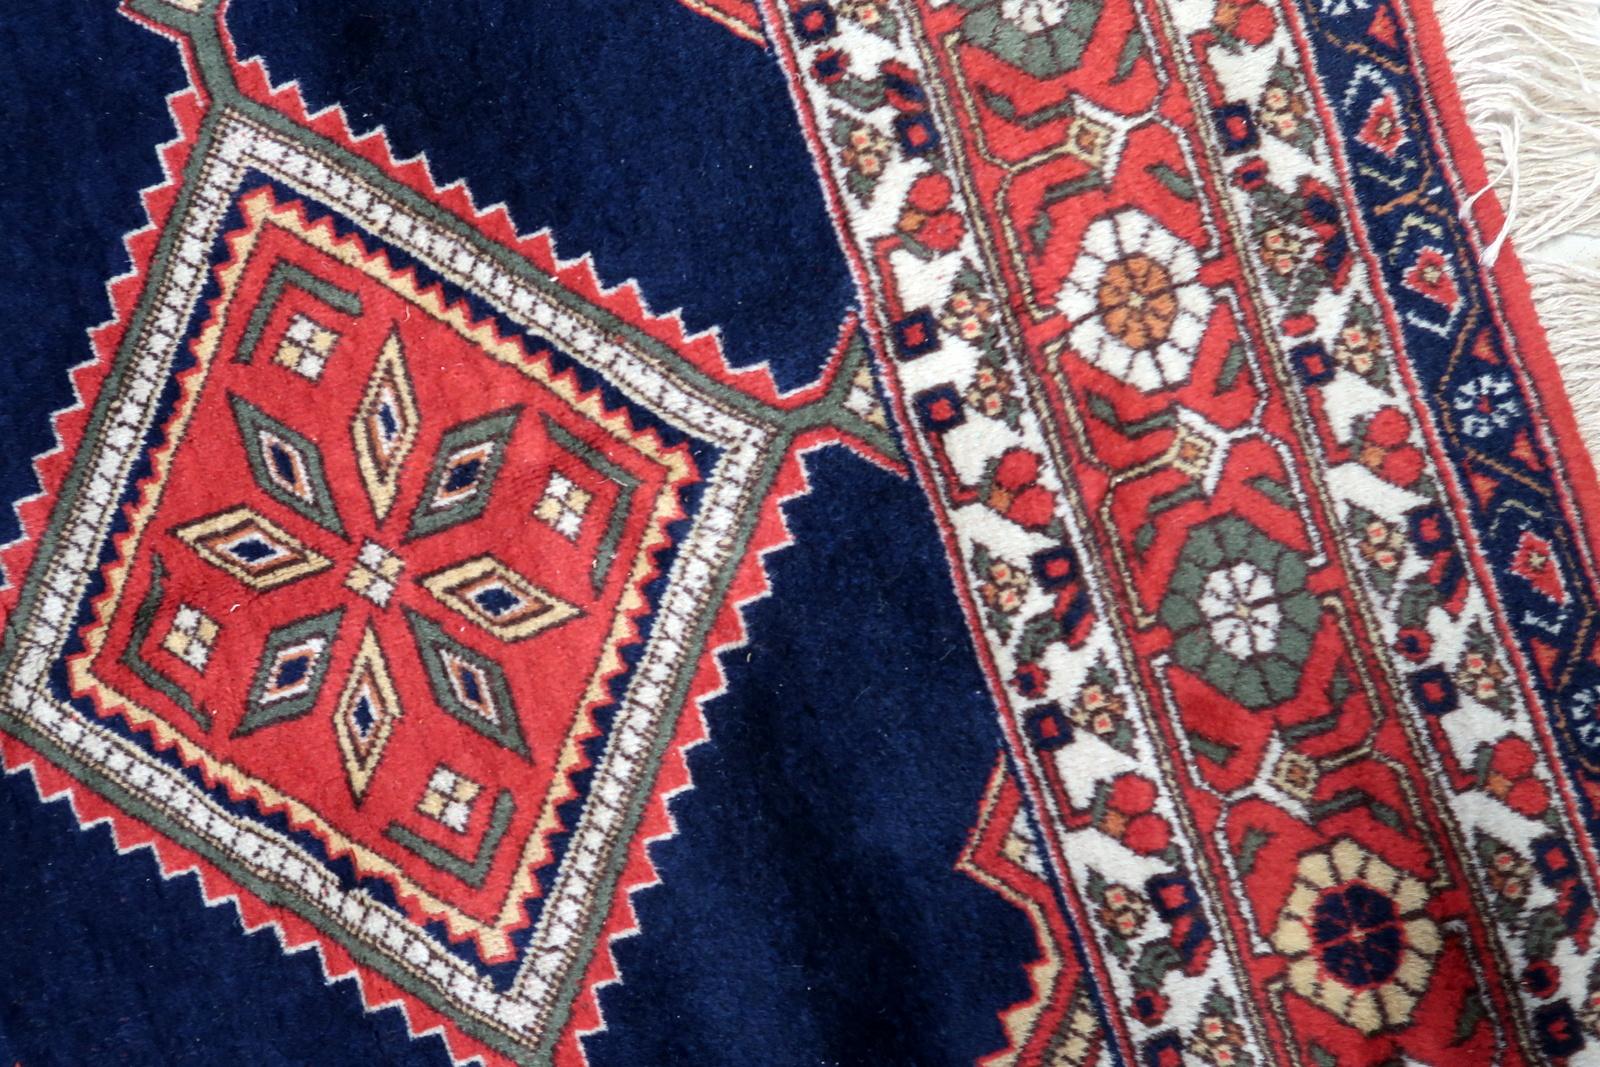 Hand-Knotted Handmade Vintage Persian Style Afshar Rug 6.4' x 9.9', 1950s - 1C1116 For Sale